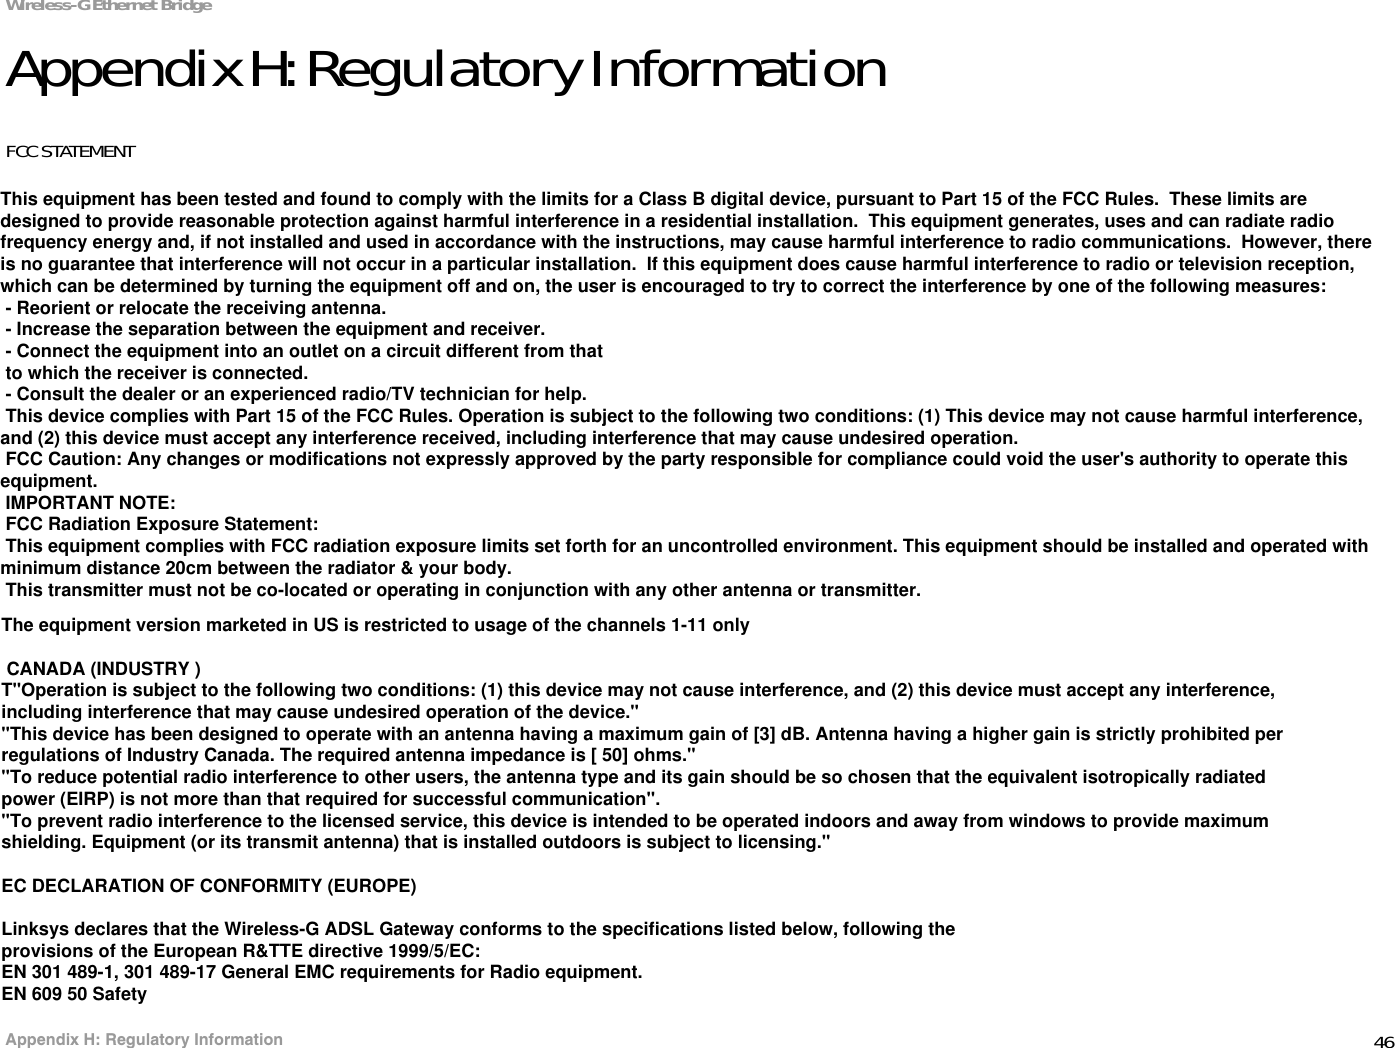 46Appendix H: Regulatory InformationWireless-G Ethernet BridgeAppendix H: Regulatory InformationFCC STATEMENTThis product has been tested and complies with the specifications for a Class B digital device, pursuant to Part 15 of the FCC Rules. These limits are designed to provide reasonable protection against harmful interference in a residential installation. This equipment generates, uses, and can radiate radio frequency energy and, if not installed and used according to the instructions, may cause harmful interference to radio communications. However, there is no guarantee that interference will not occur in a particular installation. If this equipment does cause harmful interference to radio or television reception, which is found by turning the equipment off and on, the user is encouraged to try to correct the interference by one or more of the following measures:Reorient or relocate the receiving antennaIncrease the separation between the equipment or devicesConnect the equipment to an outlet other than the receiver&apos;sConsult a dealer or an experienced radio/TV technician for assistanceFCC Radiation Exposure StatementThis equipment complies with FCC radiation exposure limits set forth for an uncontrolled environment.  This equipment should be installed and operated with minimum distance 20cm between the radiator and your body.INDUSTRY CANADA (CANADA)This Class B digital apparatus complies with Canadian ICES-003.Cet appareil numérique de la classe B est conforme à la norme NMB-003 du Canada.The use of this device in a system operating either partially or completely outdoors may require the user to obtain a license for the system according to the Canadian regulations.EC DECLARATION OF CONFORMITY (EUROPE)Linksys declares that the Wireless-G ADSL Gateway conforms to the specifications listed below, following the provisions of the European R&amp;TTE directive 1999/5/EC: EN 301 489-1, 301 489-17 General EMC requirements for Radio equipment.EN 609 50 SafetyThe equipment version marketed in US is restricted to usage of the channels 1-11 only CANADA (INDUSTRY )T&quot;Operation is subject to the following two conditions: (1) this device may not cause interference, and (2) this device must accept any interference, including interference that may cause undesired operation of the device.&quot;&quot;This device has been designed to operate with an antenna having a maximum gain of [3] dB. Antenna having a higher gain is strictly prohibited per regulations of Industry Canada. The required antenna impedance is [ 50] ohms.&quot; &quot;To reduce potential radio interference to other users, the antenna type and its gain should be so chosen that the equivalent isotropically radiated power (EIRP) is not more than that required for successful communication&quot;.&quot;To prevent radio interference to the licensed service, this device is intended to be operated indoors and away from windows to provide maximum shielding. Equipment (or its transmit antenna) that is installed outdoors is subject to licensing.&quot;EC DECLARATION OF CONFORMITY (EUROPE)Linksys declares that the Wireless-G ADSL Gateway conforms to the specifications listed below, following theprovisions of the European R&amp;TTE directive 1999/5/EC:EN 301 489-1, 301 489-17 General EMC requirements for Radio equipment.EN 609 50 SafetyThe equipment version marketed in US is restricted to usage of the channels 1-11 onlyThis equipment has been tested and found to comply with the limits for a Class B digital device, pursuant to Part 15 of the FCC Rules.  These limits are designed to provide reasonable protection against harmful interference in a residential installation.  This equipment generates, uses and can radiate radio frequency energy and, if not installed and used in accordance with the instructions, may cause harmful interference to radio communications.  However, there is no guarantee that interference will not occur in a particular installation.  If this equipment does cause harmful interference to radio or television reception, which can be determined by turning the equipment off and on, the user is encouraged to try to correct the interference by one of the following measures: - Reorient or relocate the receiving antenna. - Increase the separation between the equipment and receiver. - Connect the equipment into an outlet on a circuit different from that to which the receiver is connected. - Consult the dealer or an experienced radio/TV technician for help. This device complies with Part 15 of the FCC Rules. Operation is subject to the following two conditions: (1) This device may not cause harmful interference, and (2) this device must accept any interference received, including interference that may cause undesired operation. FCC Caution: Any changes or modifications not expressly approved by the party responsible for compliance could void the user&apos;s authority to operate this equipment. IMPORTANT NOTE: FCC Radiation Exposure Statement: This equipment complies with FCC radiation exposure limits set forth for an uncontrolled environment. This equipment should be installed and operated with minimum distance 20cm between the radiator &amp; your body. This transmitter must not be co-located or operating in conjunction with any other antenna or transmitter.